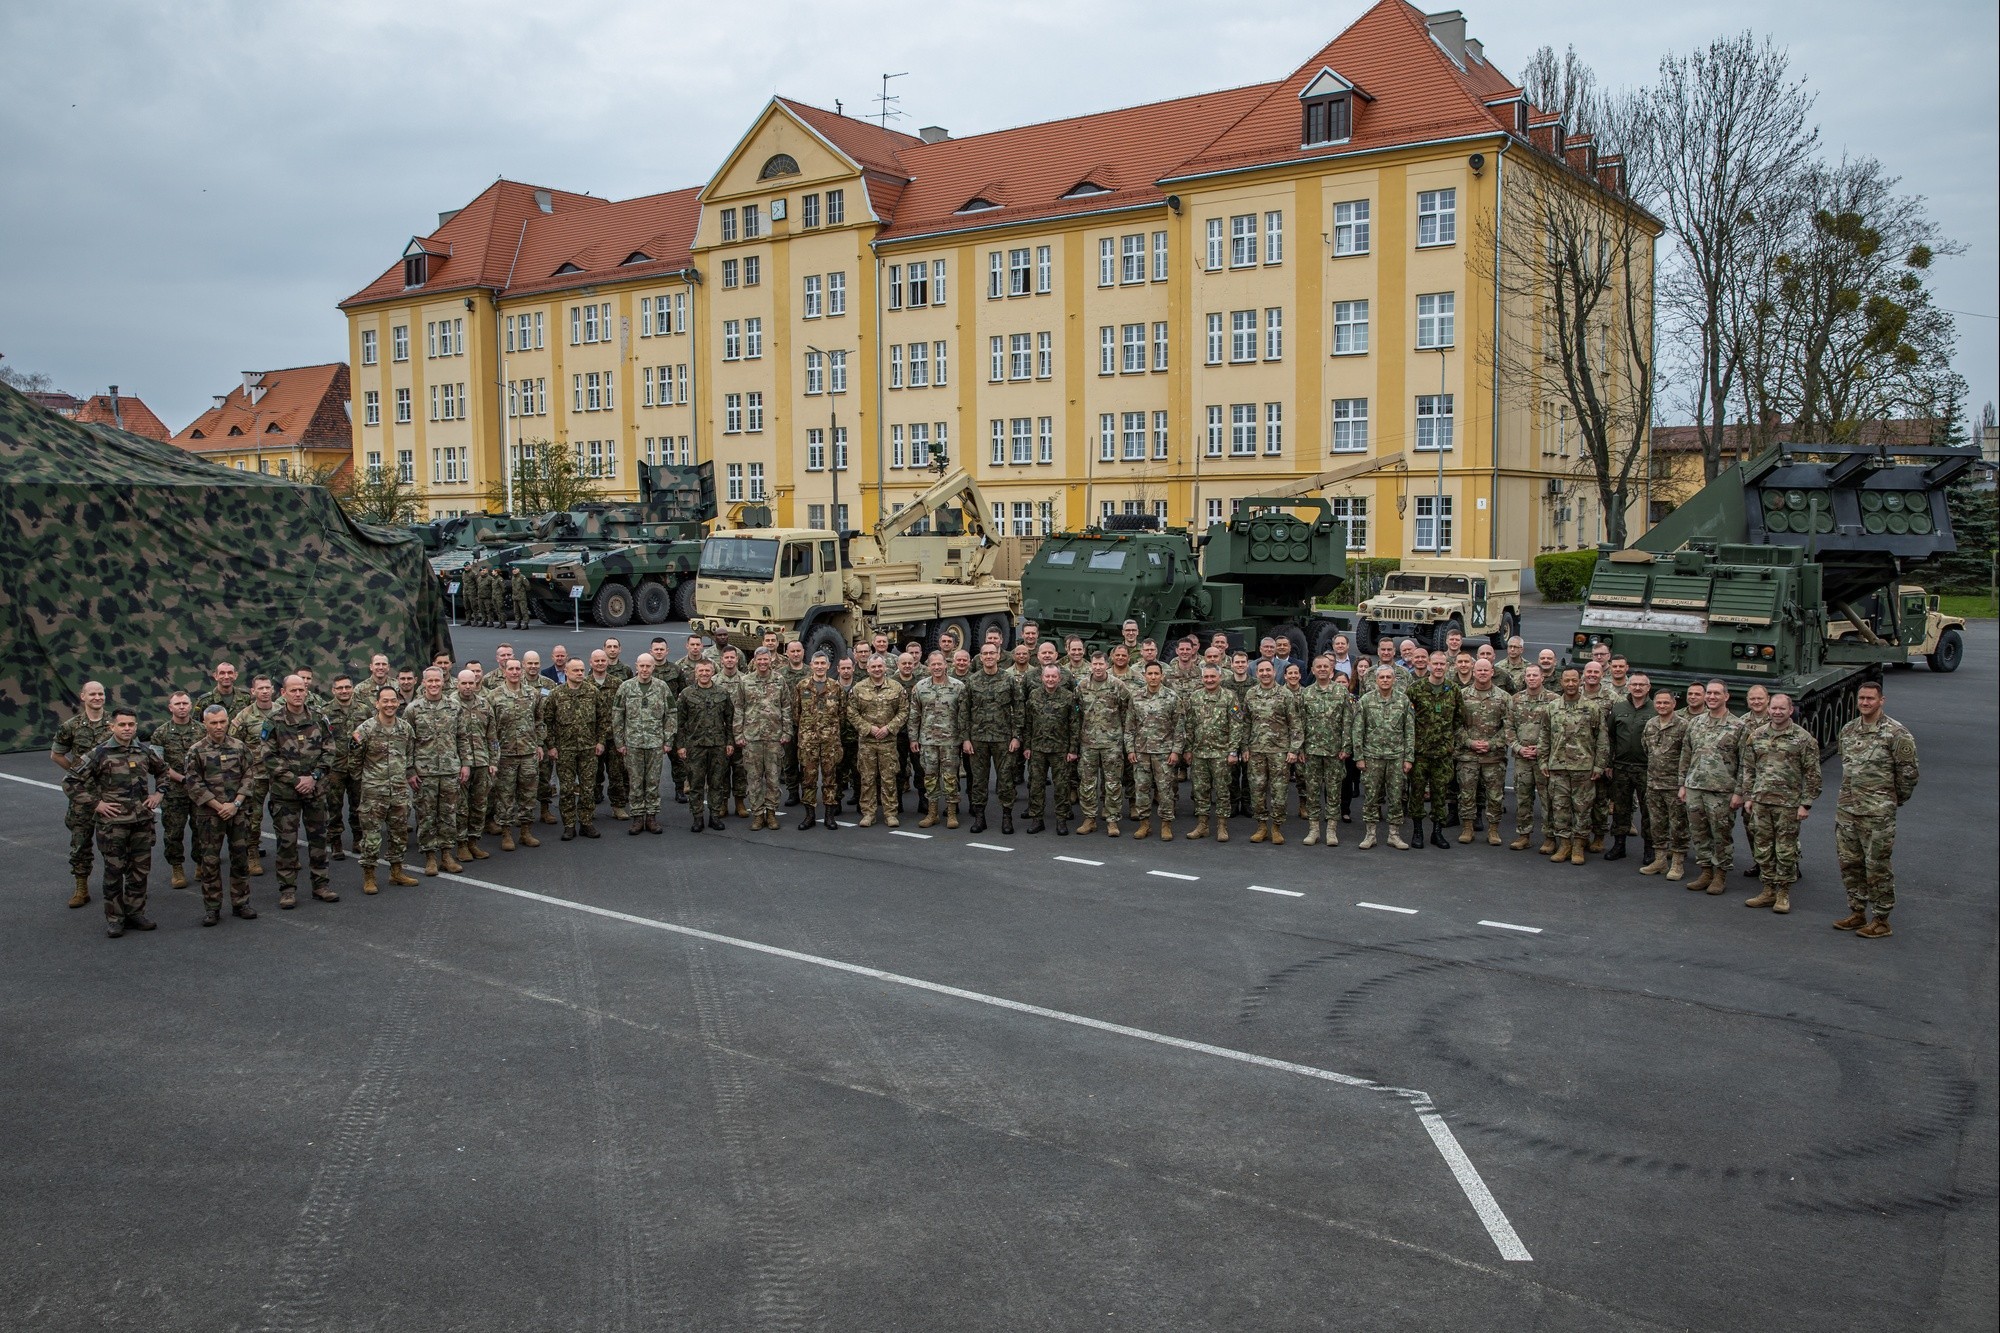 U.S. and NATO senior military leaders pose for a group photo during the European Rocket Artillery Summit in Toruń, Poland, April 18, 2023. The 4th Infantry Division’s mission in Europe is to engage in multinational training and exercises across the continent, working alongside NATO allies and regional security partners to provide combat-credible forces to V Corps, America’s forward deployed corps in Europe. (U.S. Army National Guard photo by Sgt. John Schoebel)